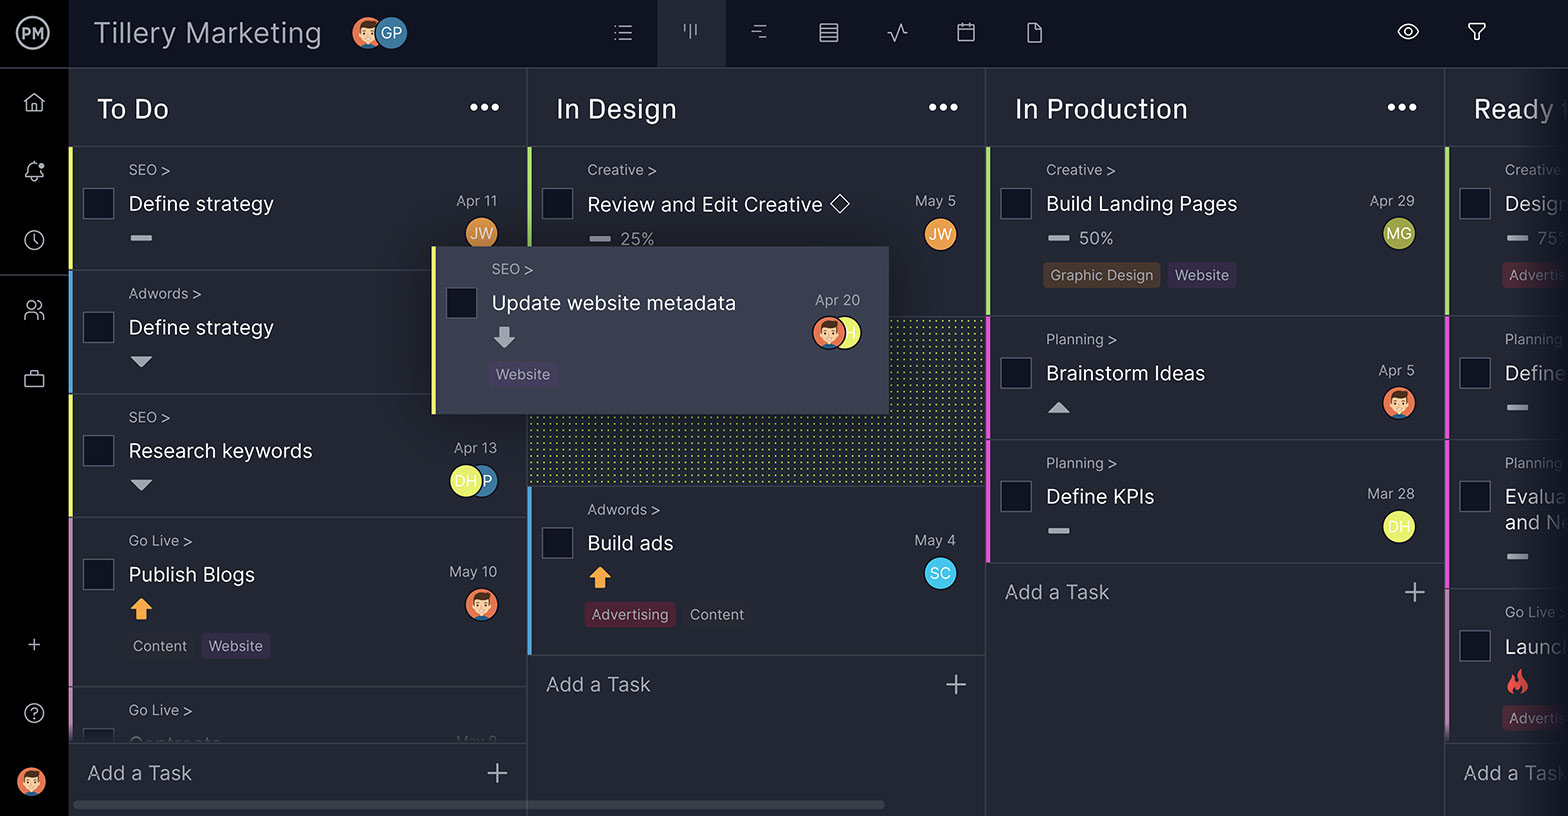 ProjectManager's kanban board are ideal for marketing teams